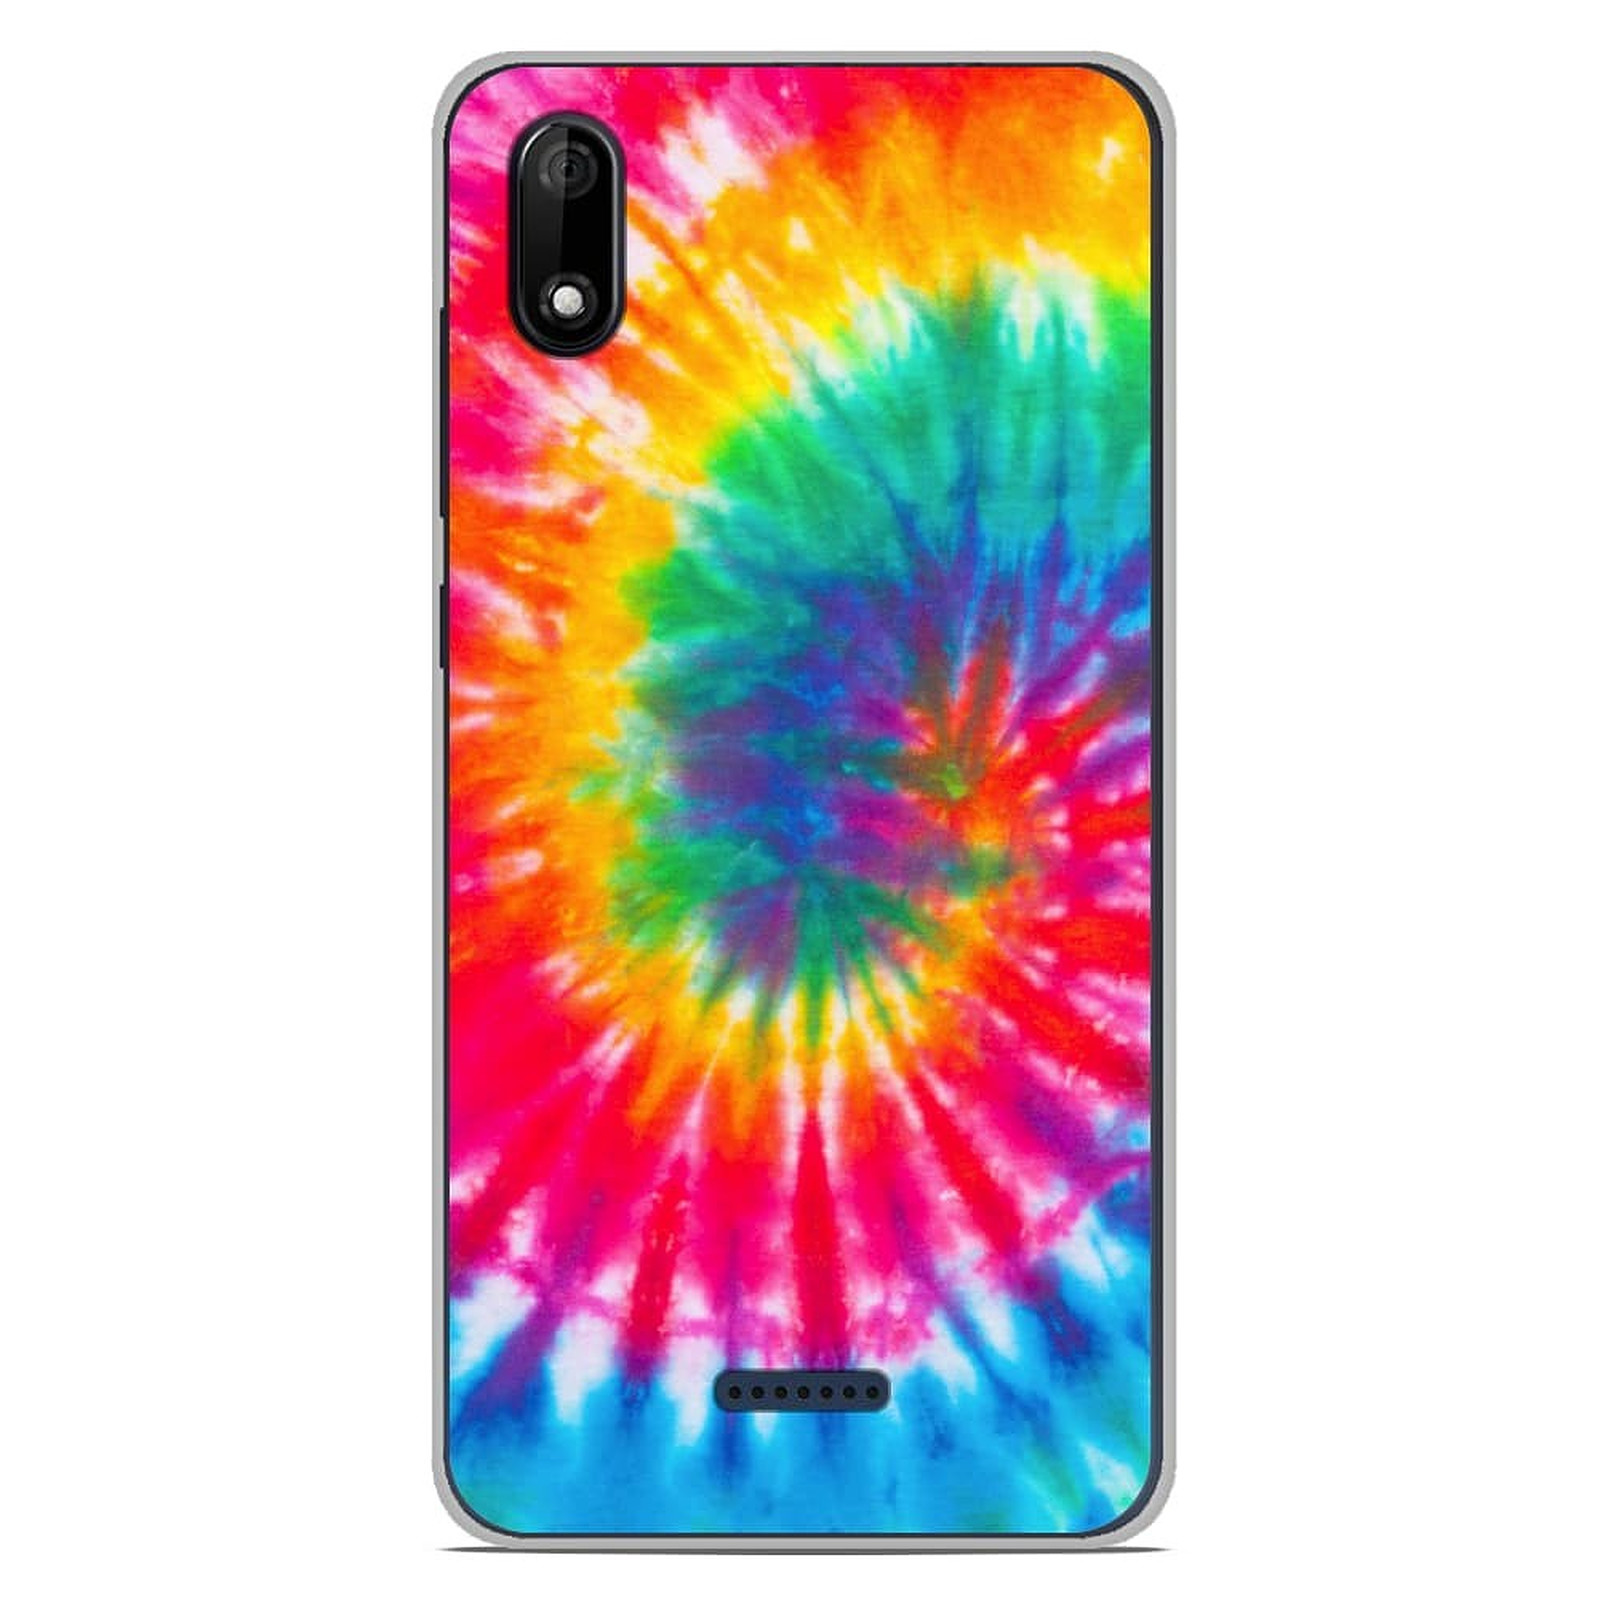 1001 Coques Coque silicone gel Wiko Y50 motif Tie Dye Spirale - Coque telephone 1001Coques